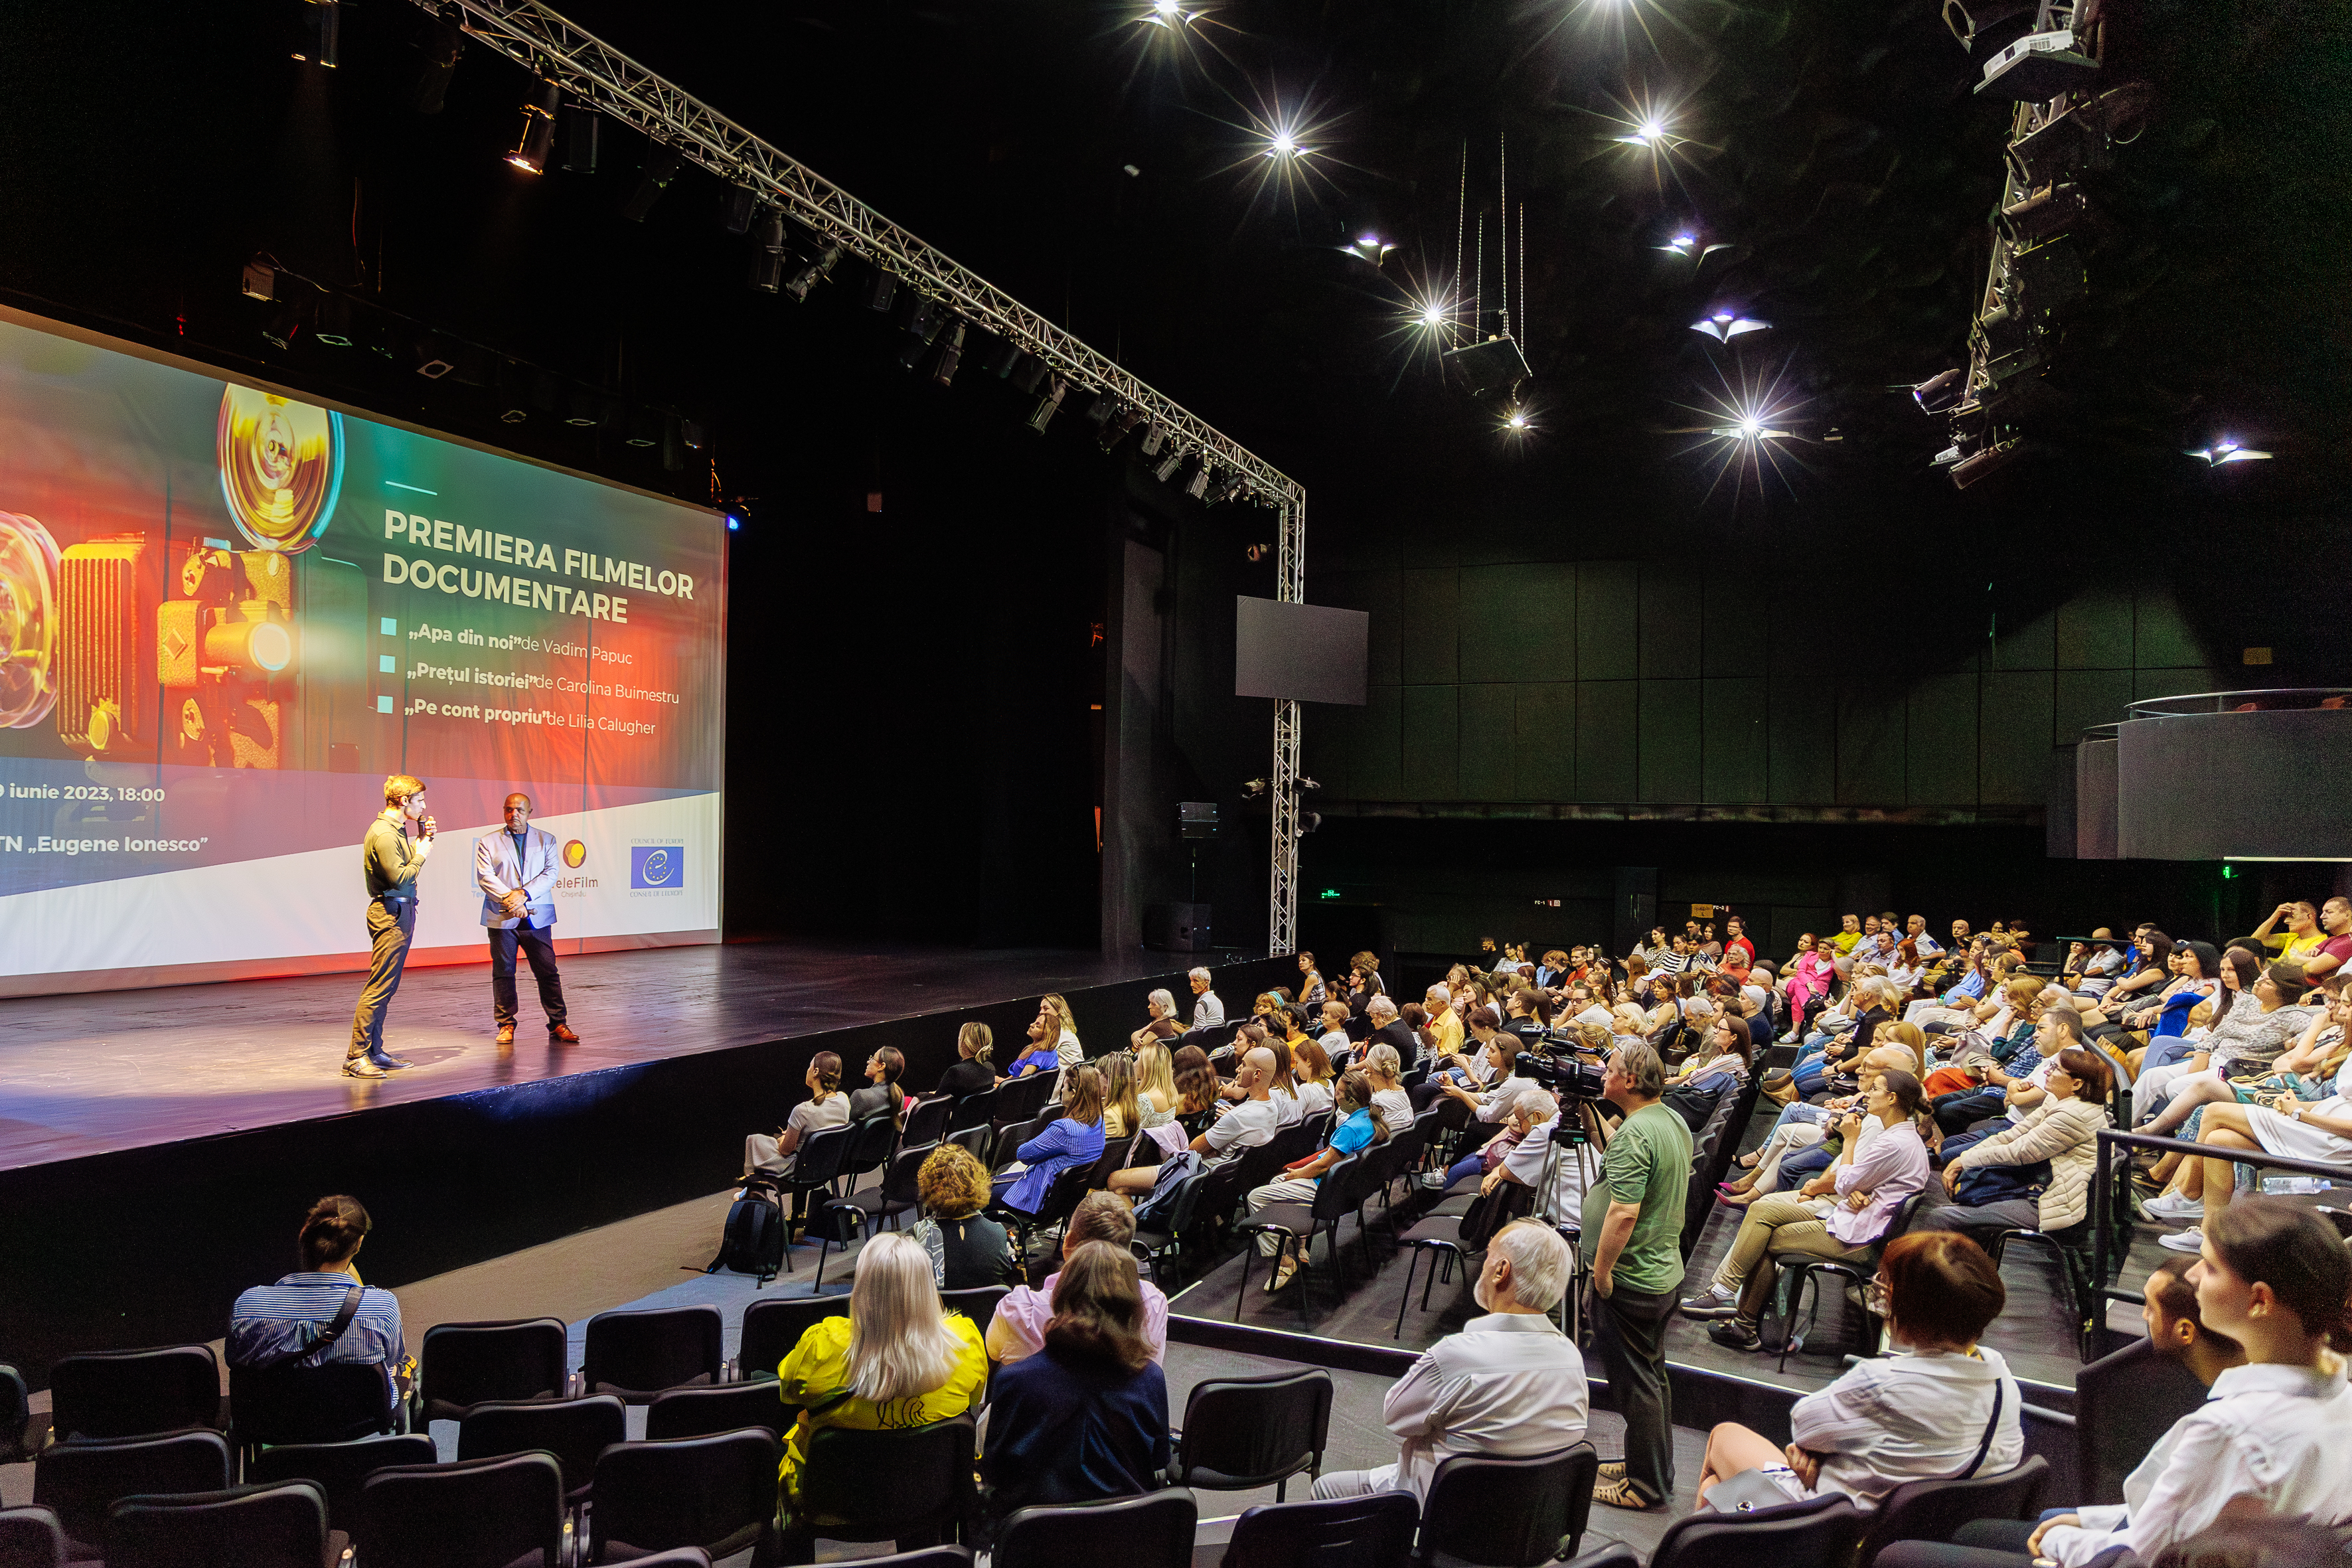 The public in Chisinau enjoyed three documentaries narrating life experiences of three heroes from different regions